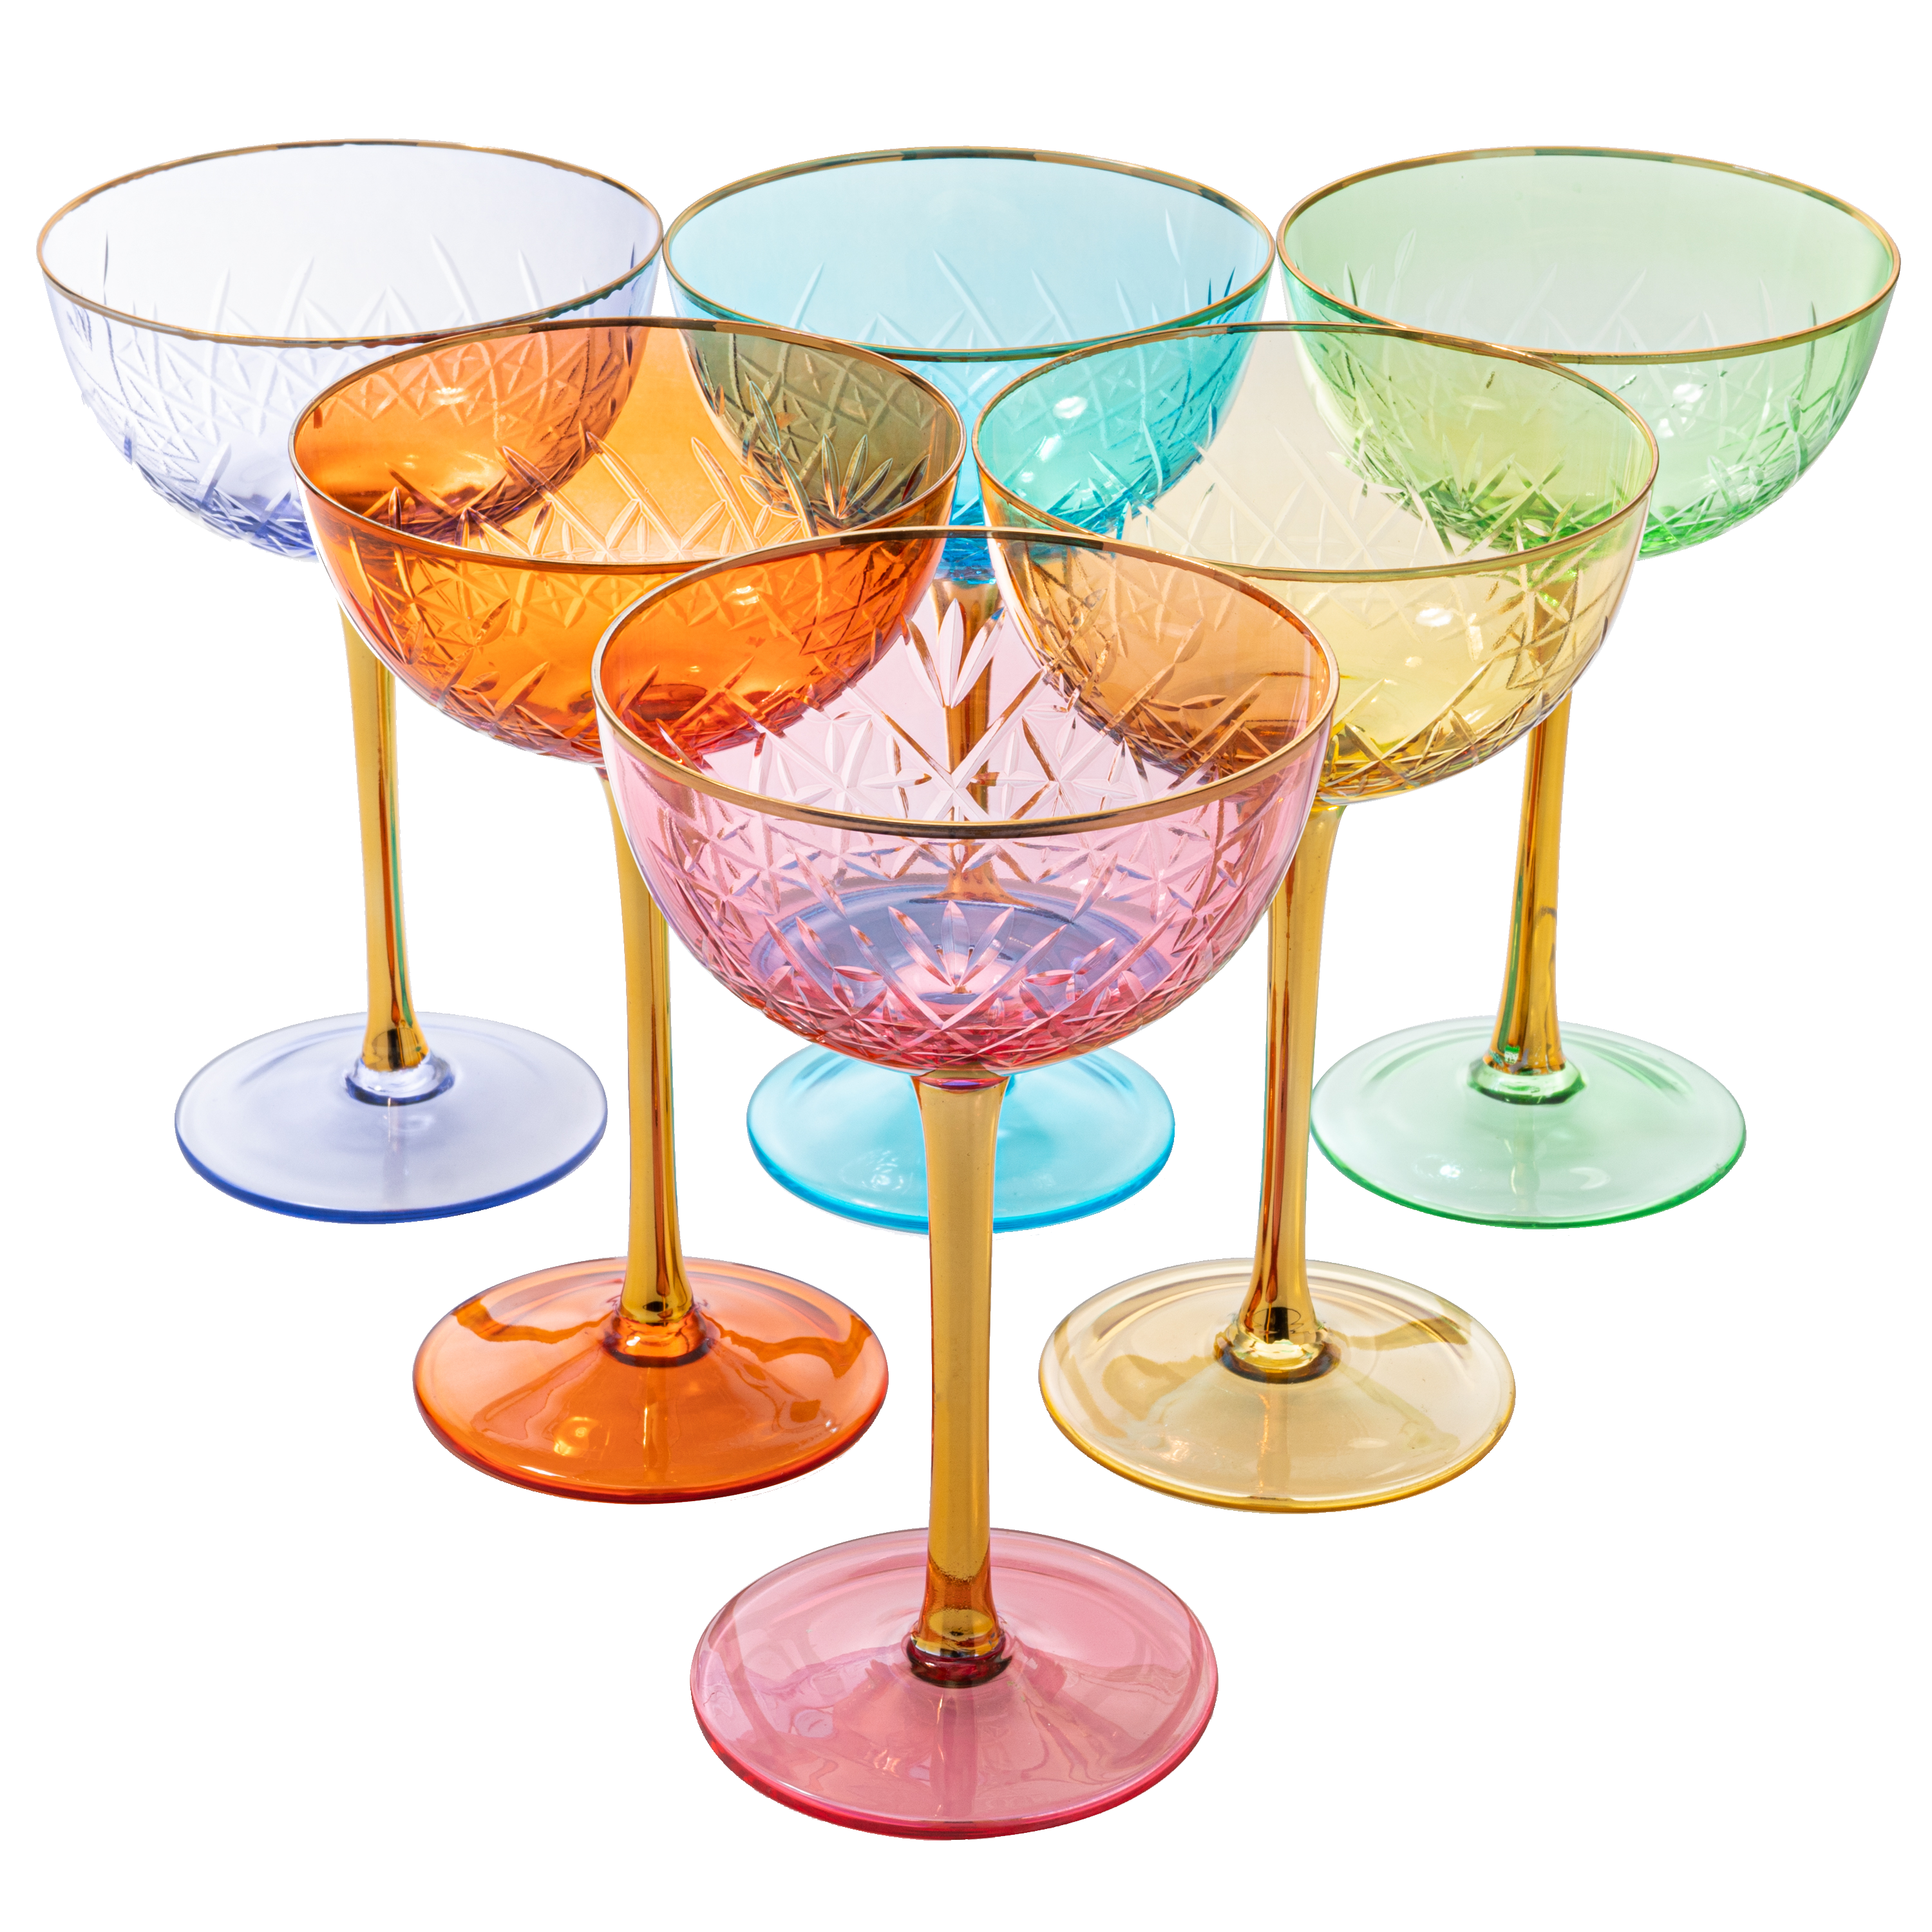 7 Coupe Glasses That Will Make You Feel Like Jay Gatsby